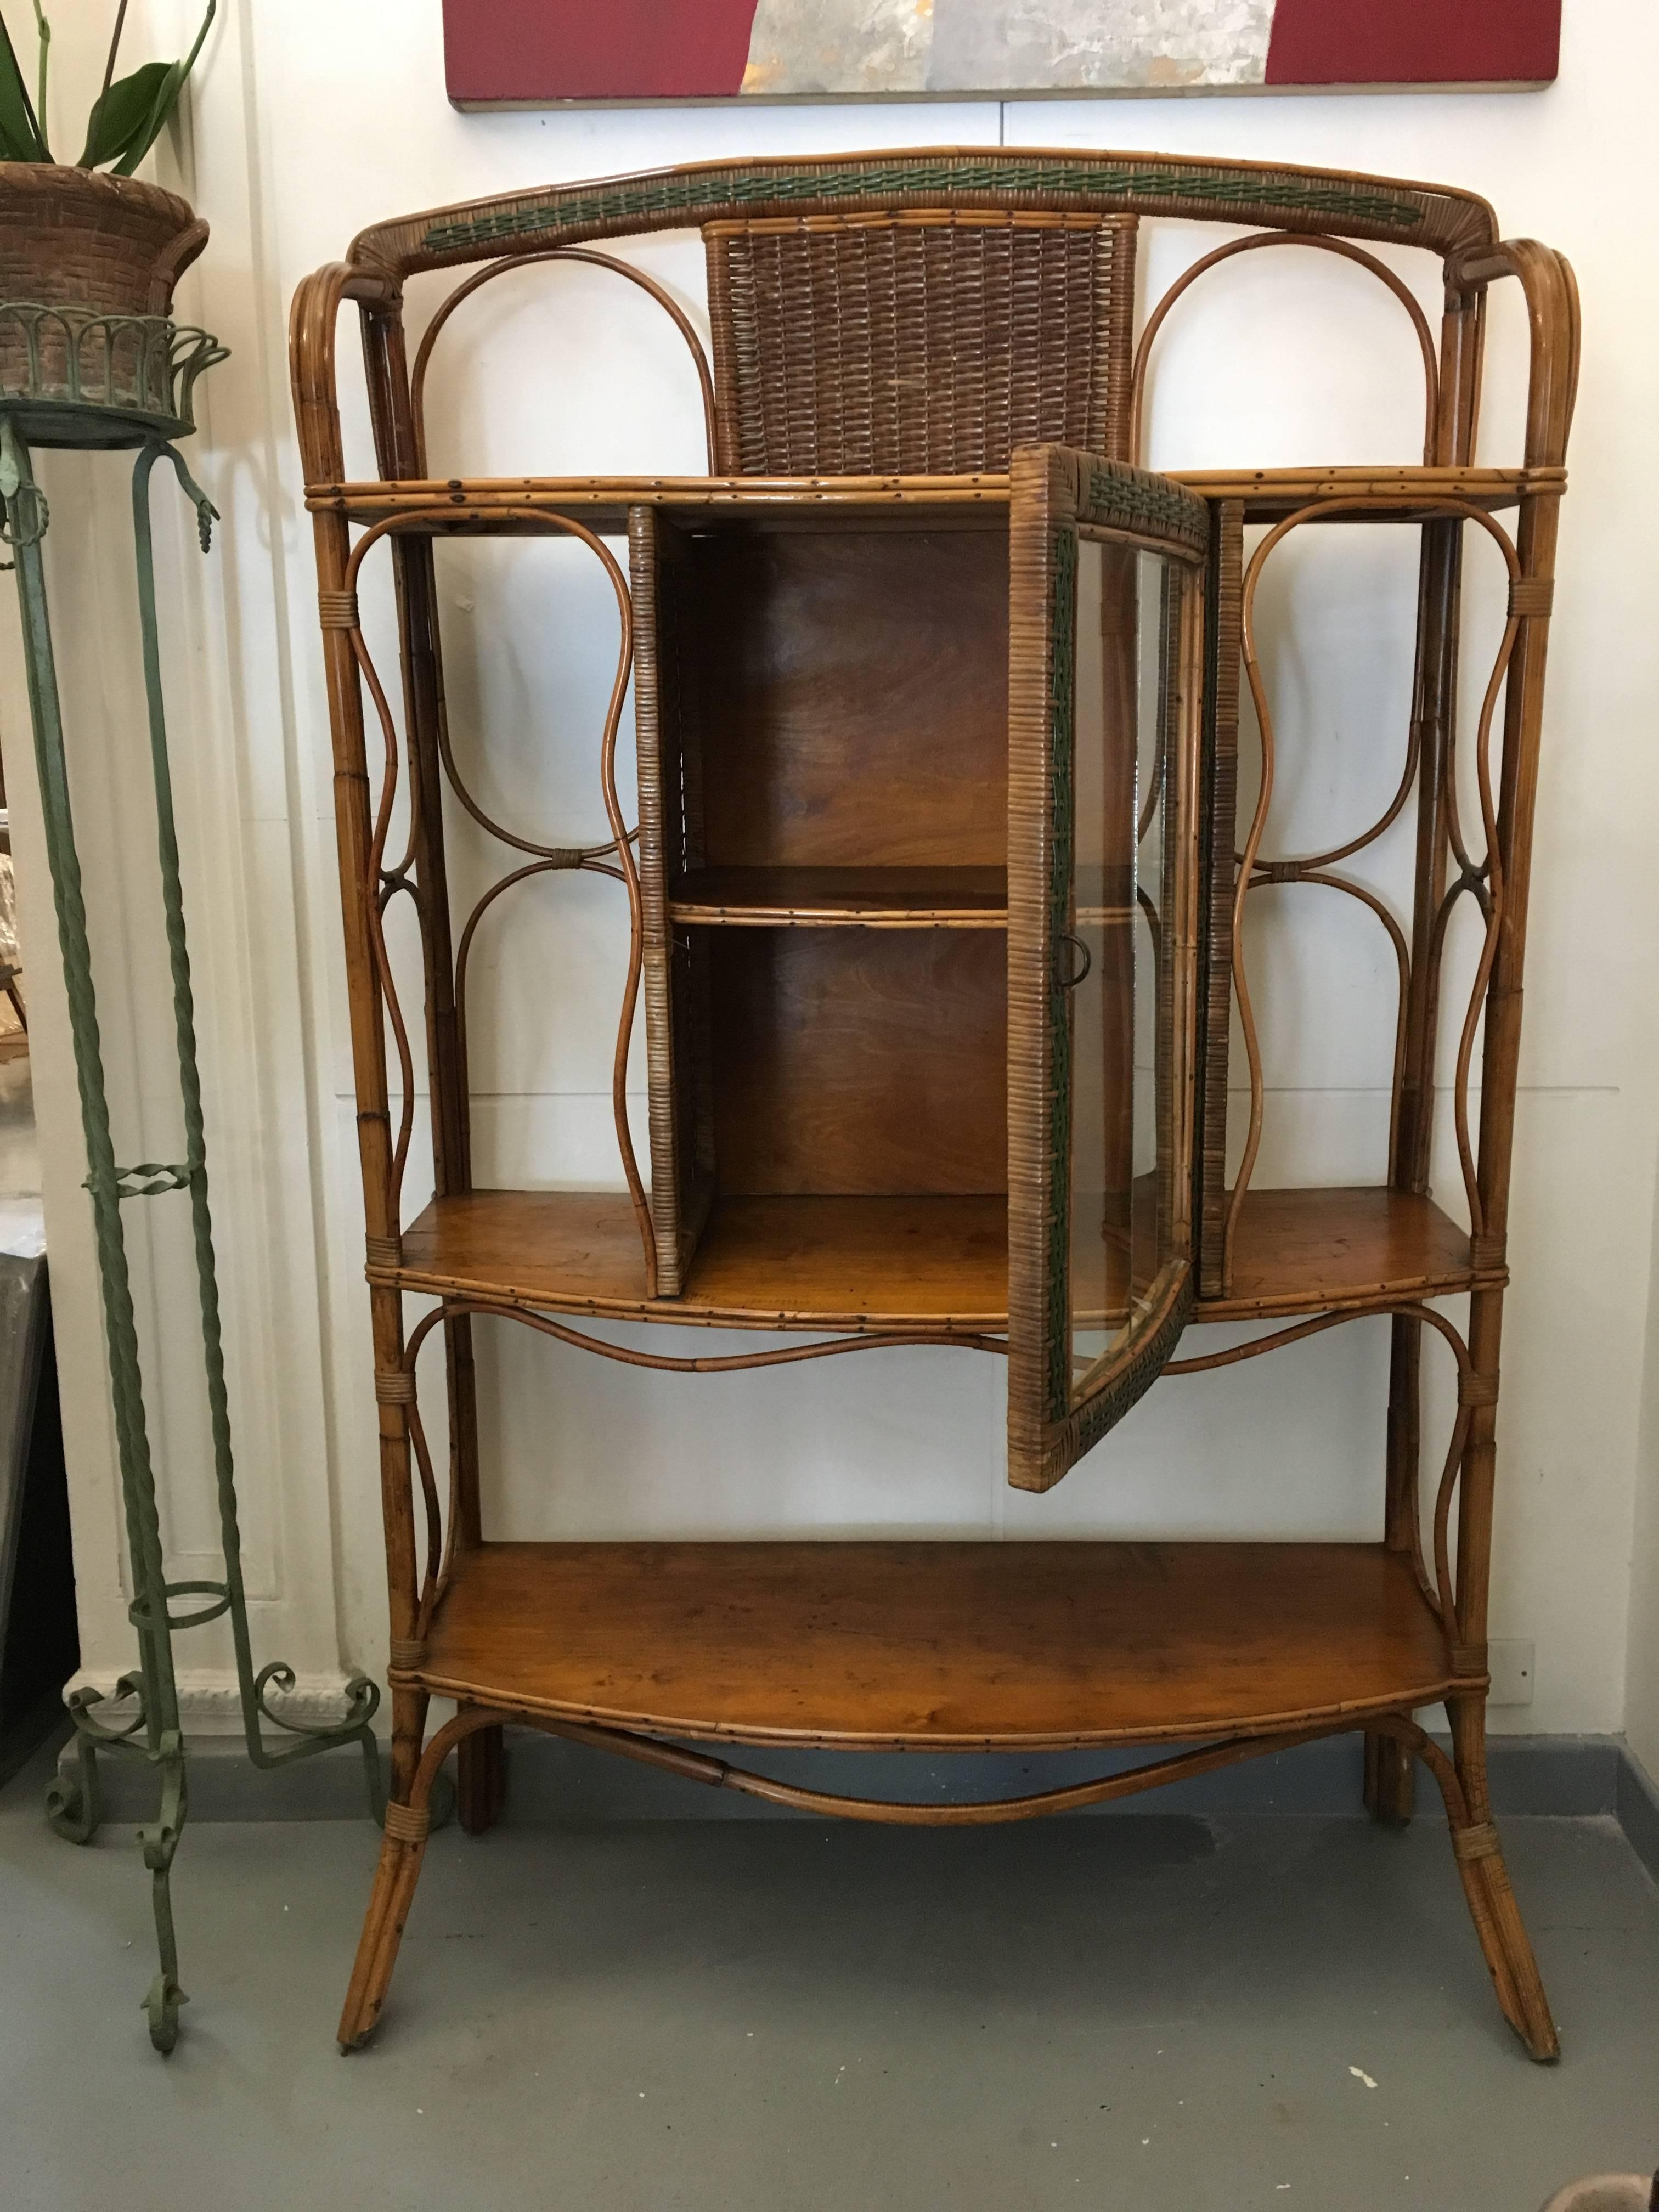 This wicker cabinet with three shelves and a central compartment with an interior shelf is decorated with green art nouveau details and is in the Colonial style.